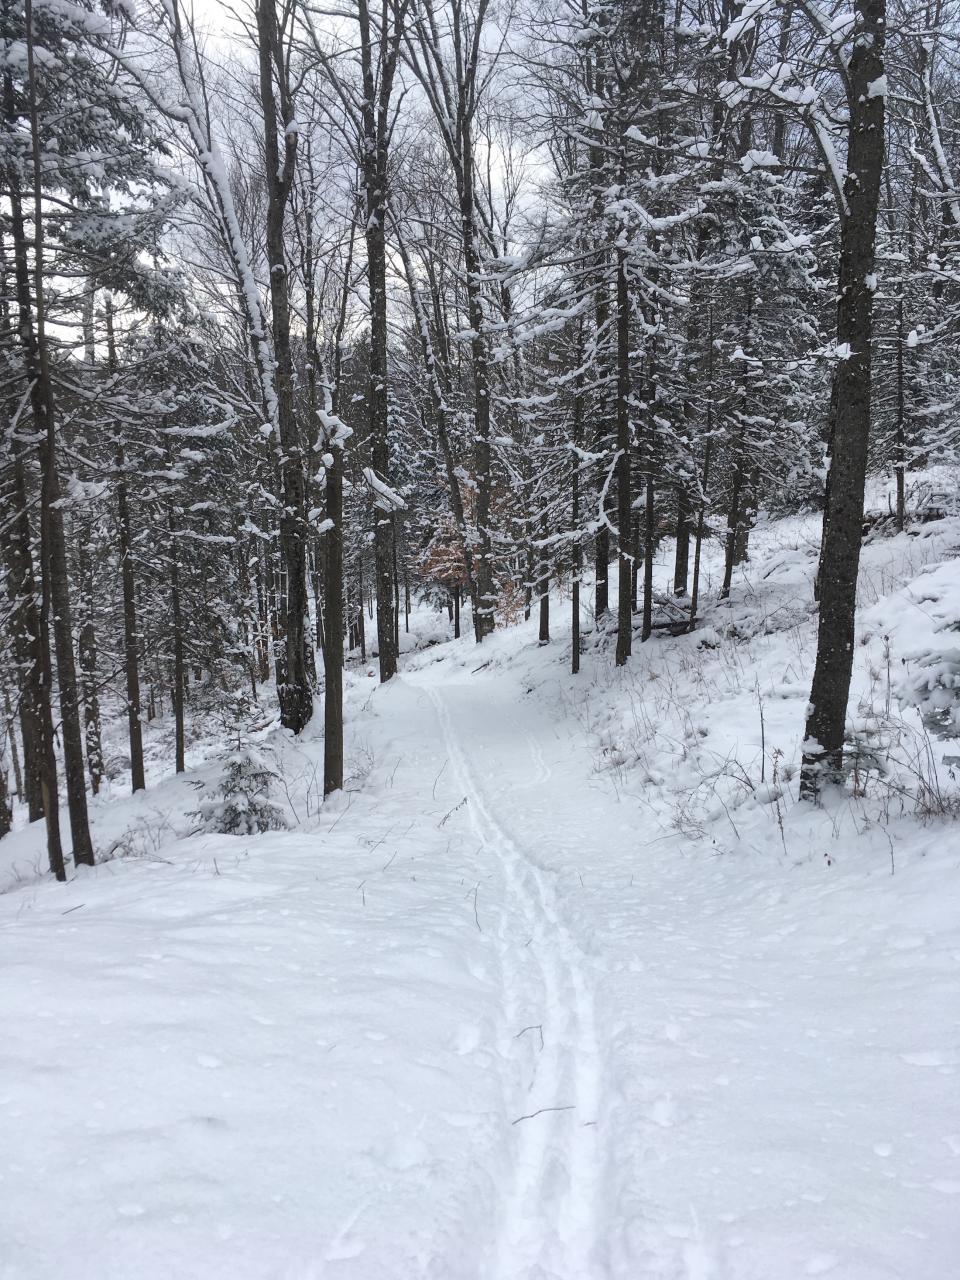 Tracks on ungroomed backcountry trail